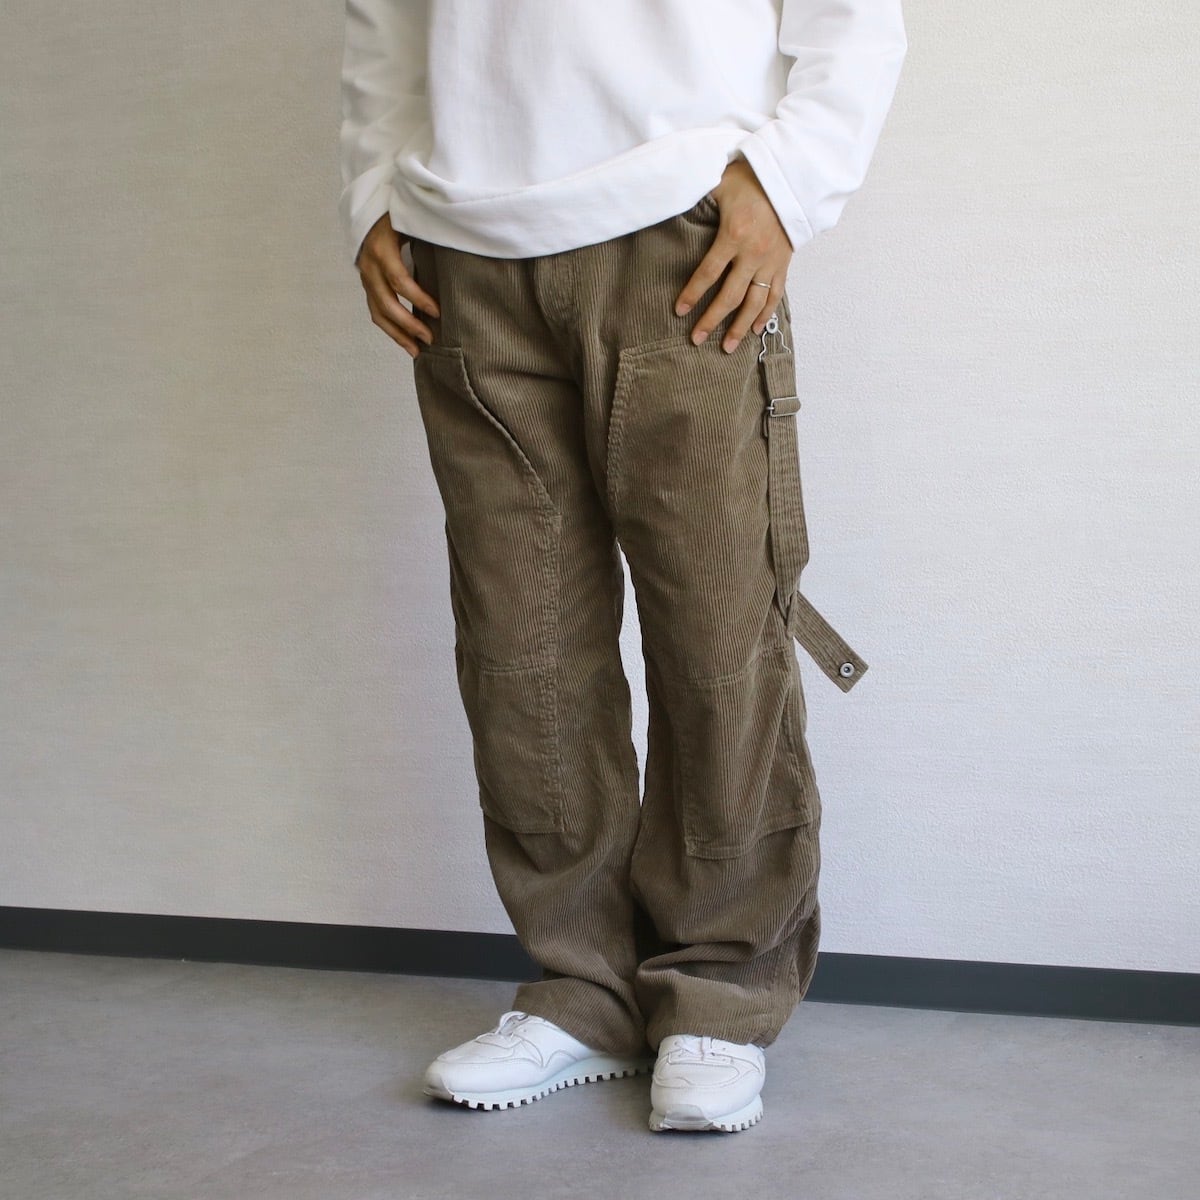 【SUNDAY WORKS サンデーワークス】CORDUROY DOUBLE KNEE PANTS コーデュロイダブルニーパンツ SW211001  (2COLORS) | VERSTECK powered by BASE